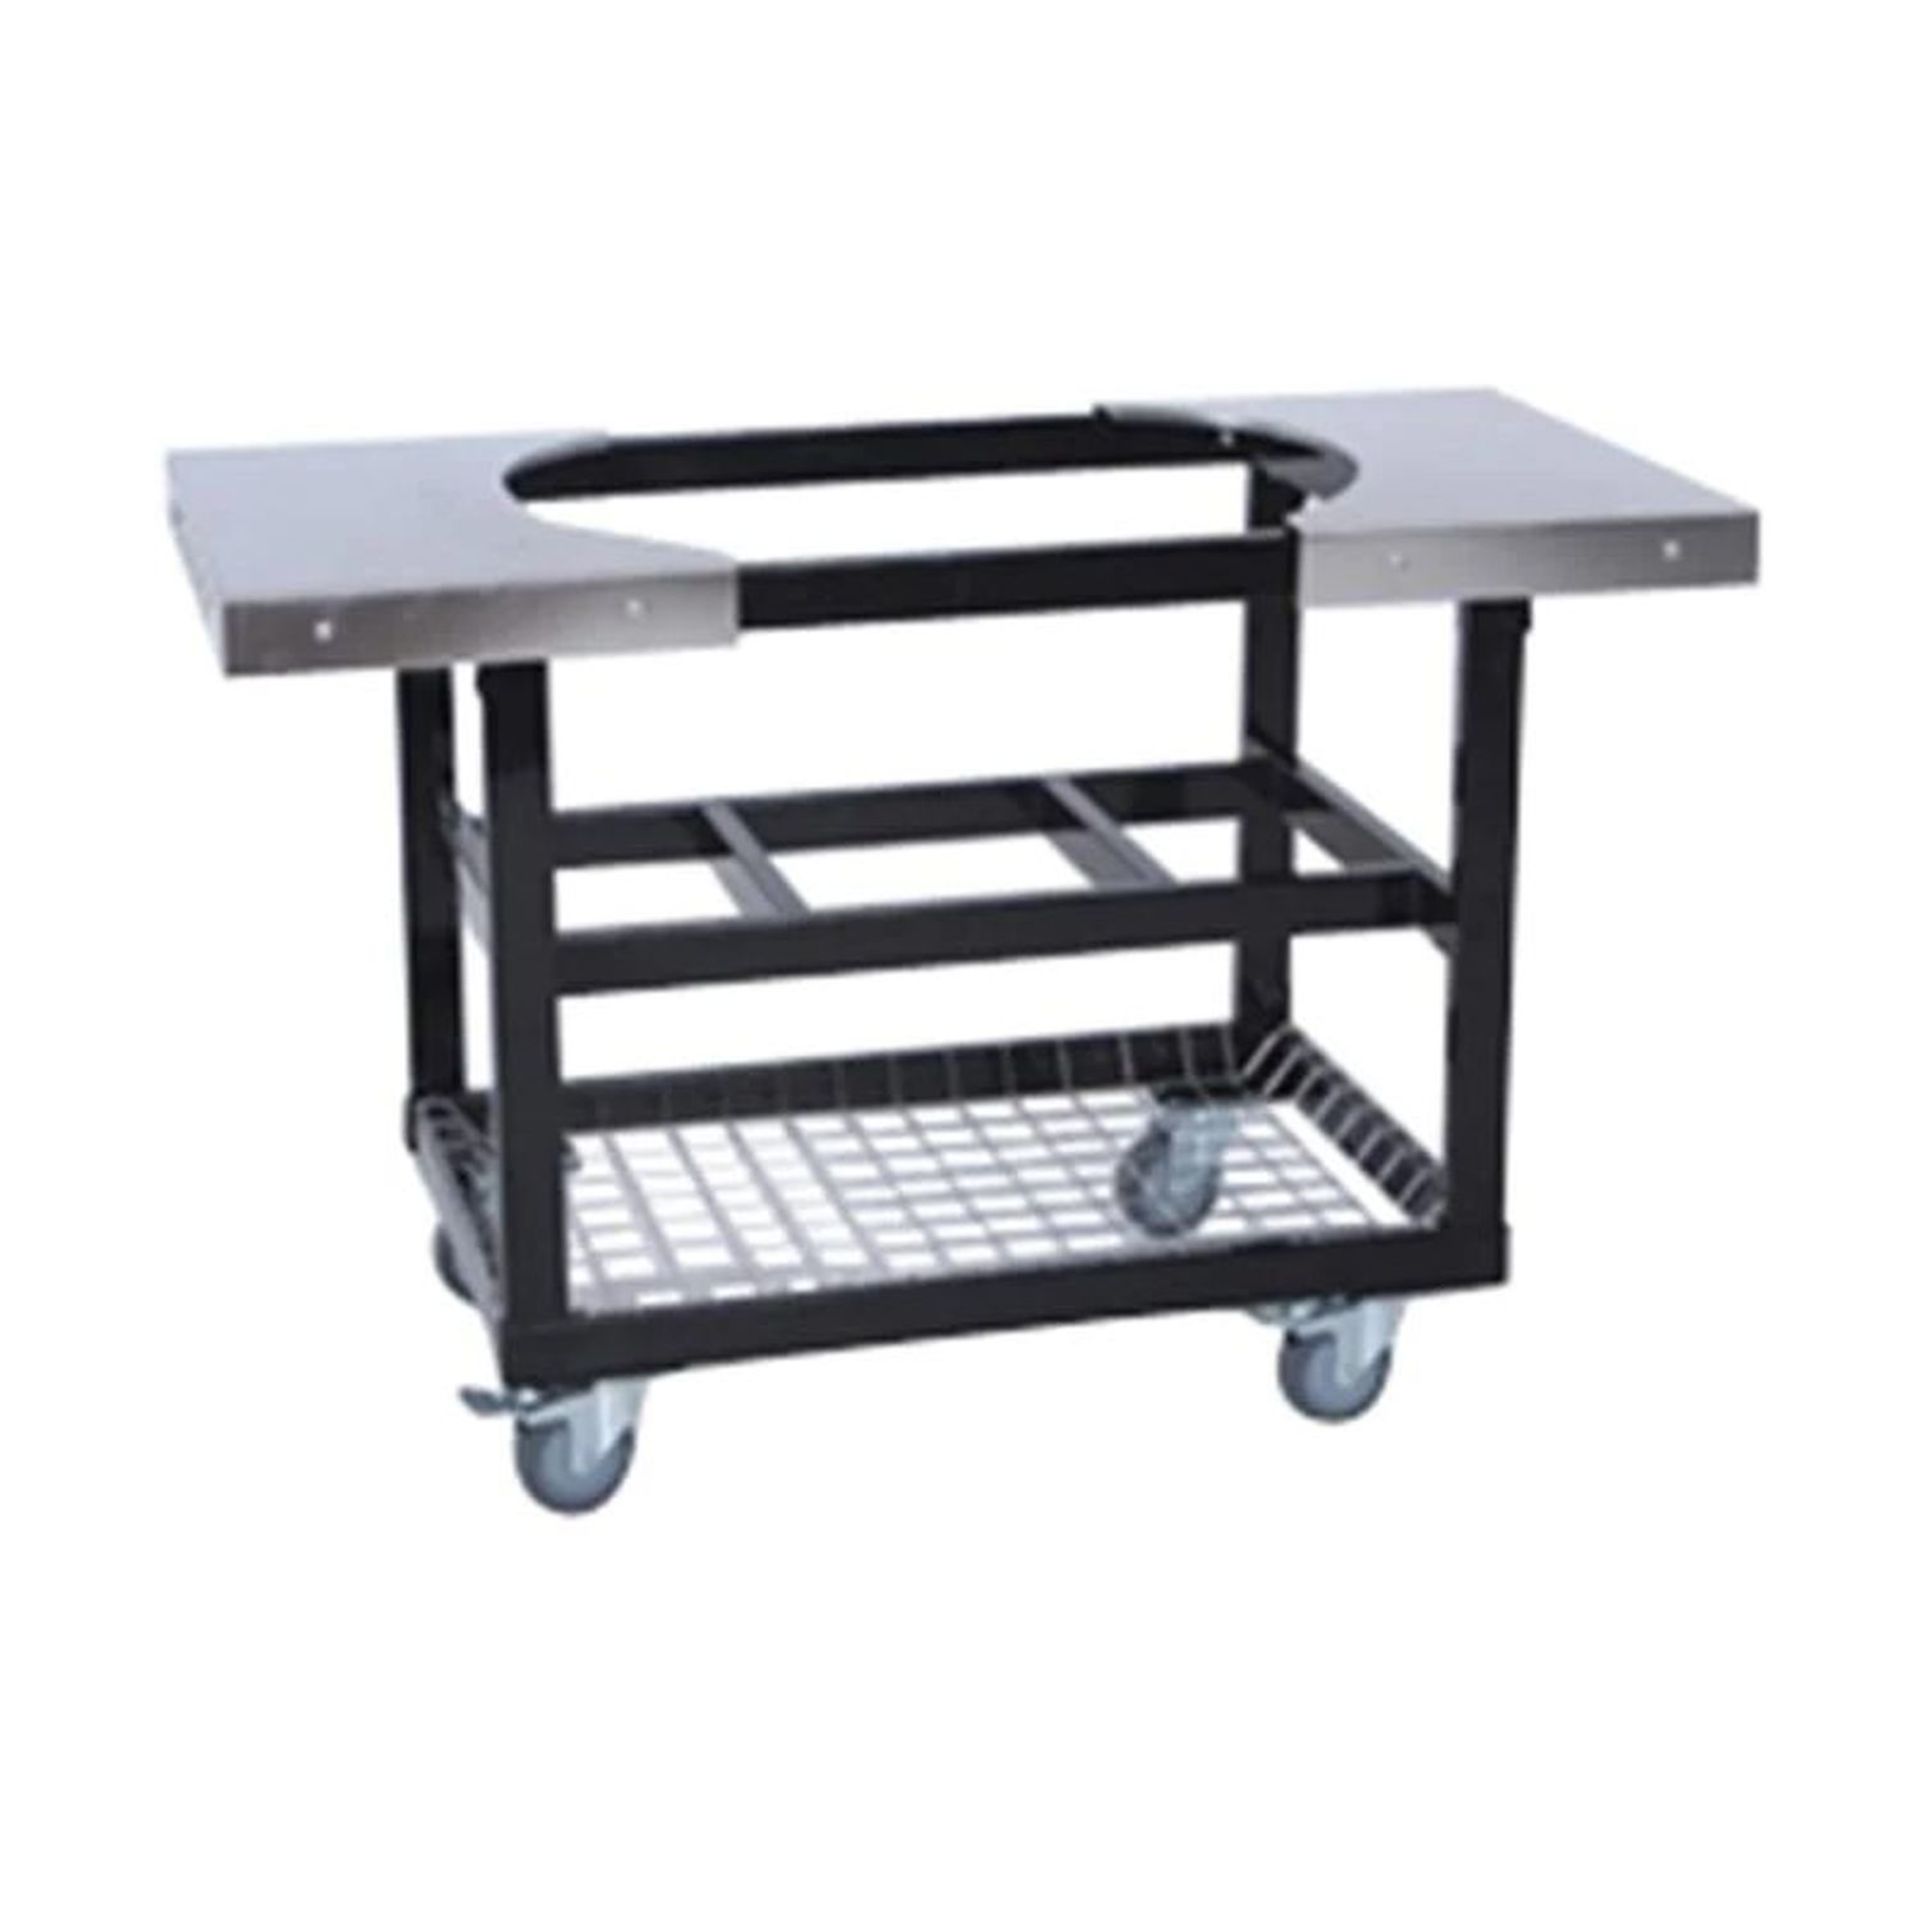 PRIMO STEEL S/S SIDE SHELVES FOR OVAL LG 300 AND XL 400 (RETAIL $589.99)